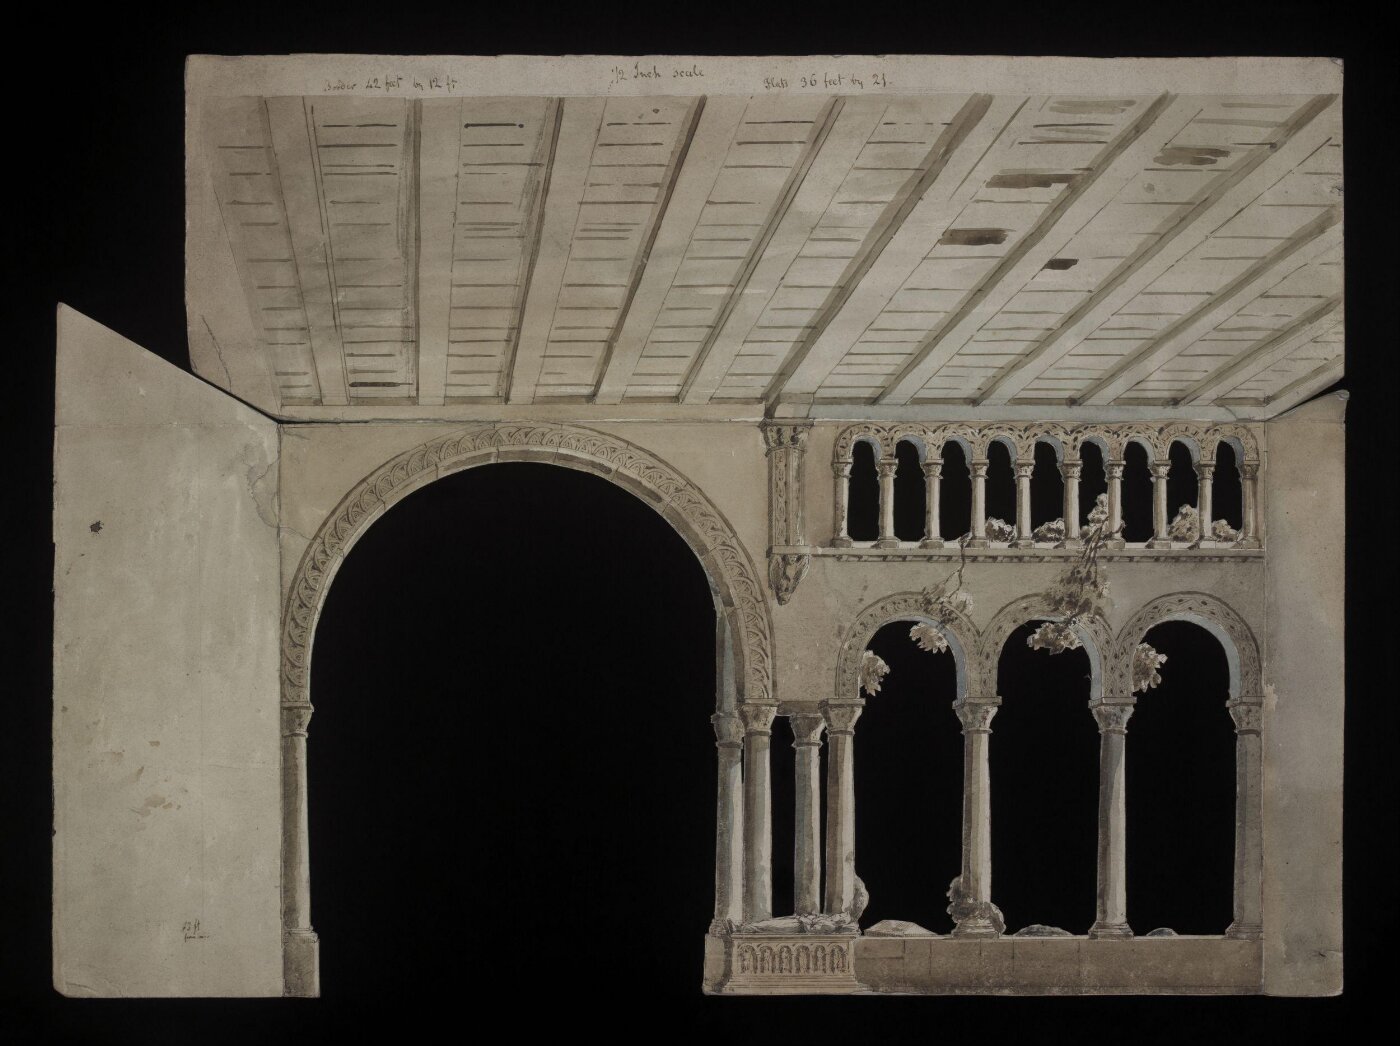 Theatre set design by Clarkson Stanfield. Aquired from the Bagshawe Estate, V&A S27-2000